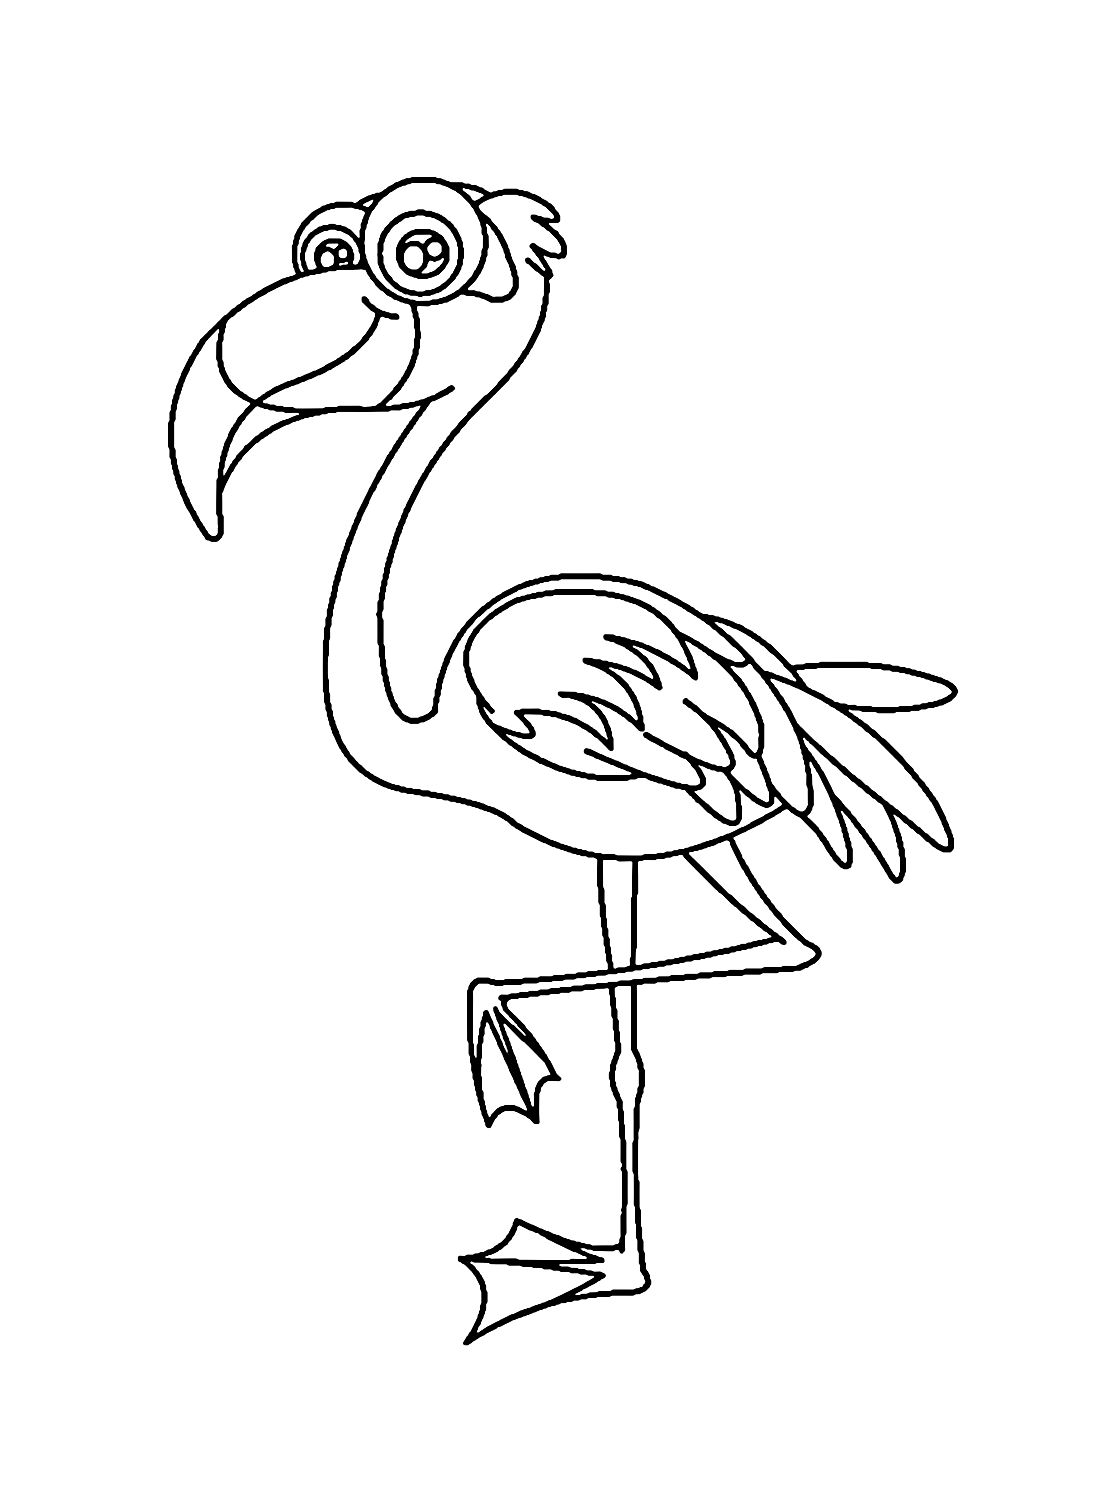 Flamingo with Big Eyes Coloring Pages